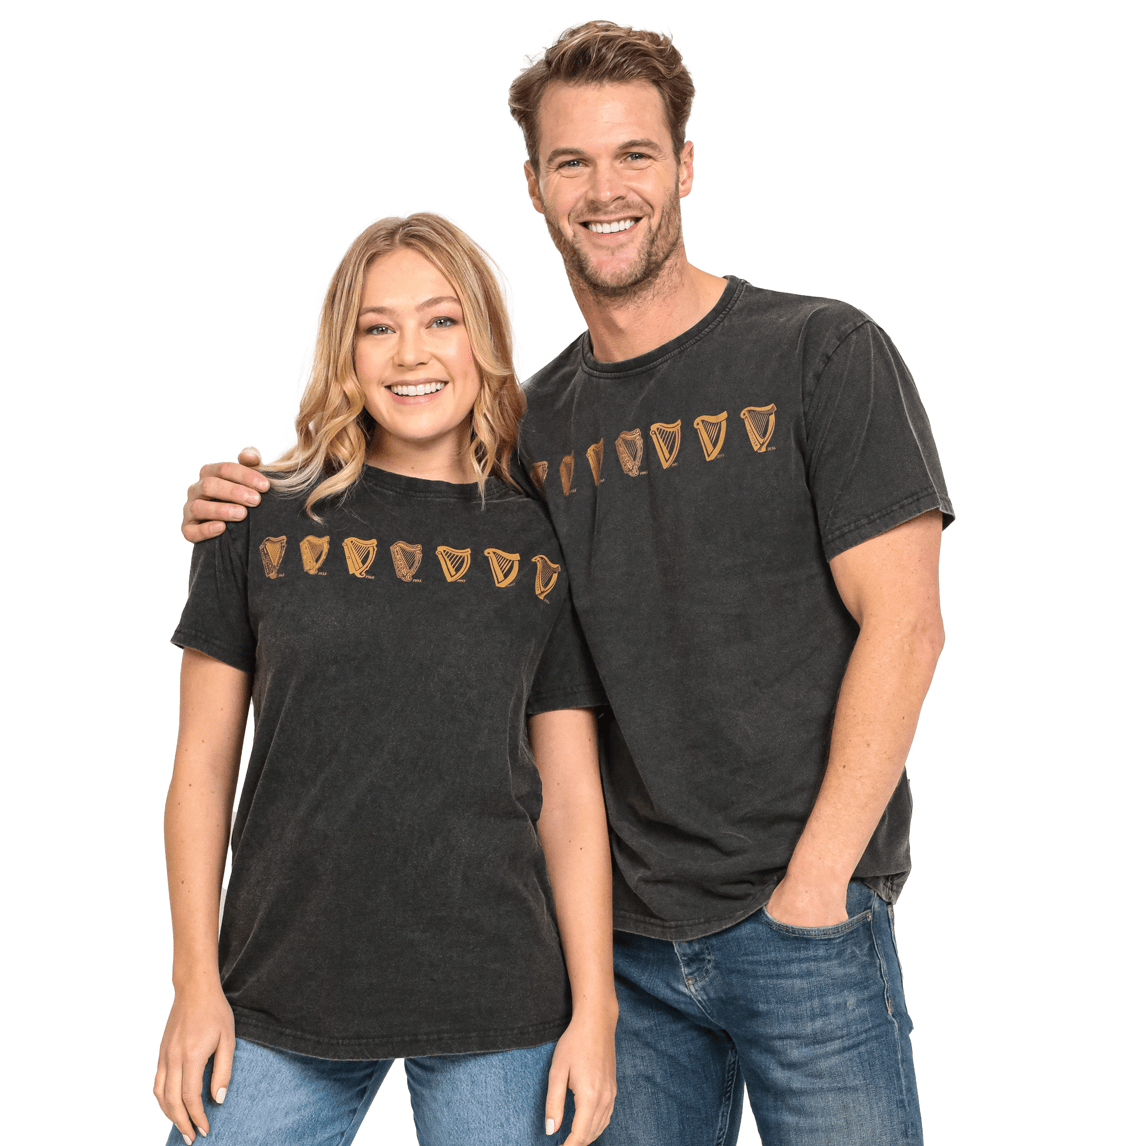 A man and woman standing next to each other wearing Guinness UK Evolution Harp Tee black cotton t-shirts.